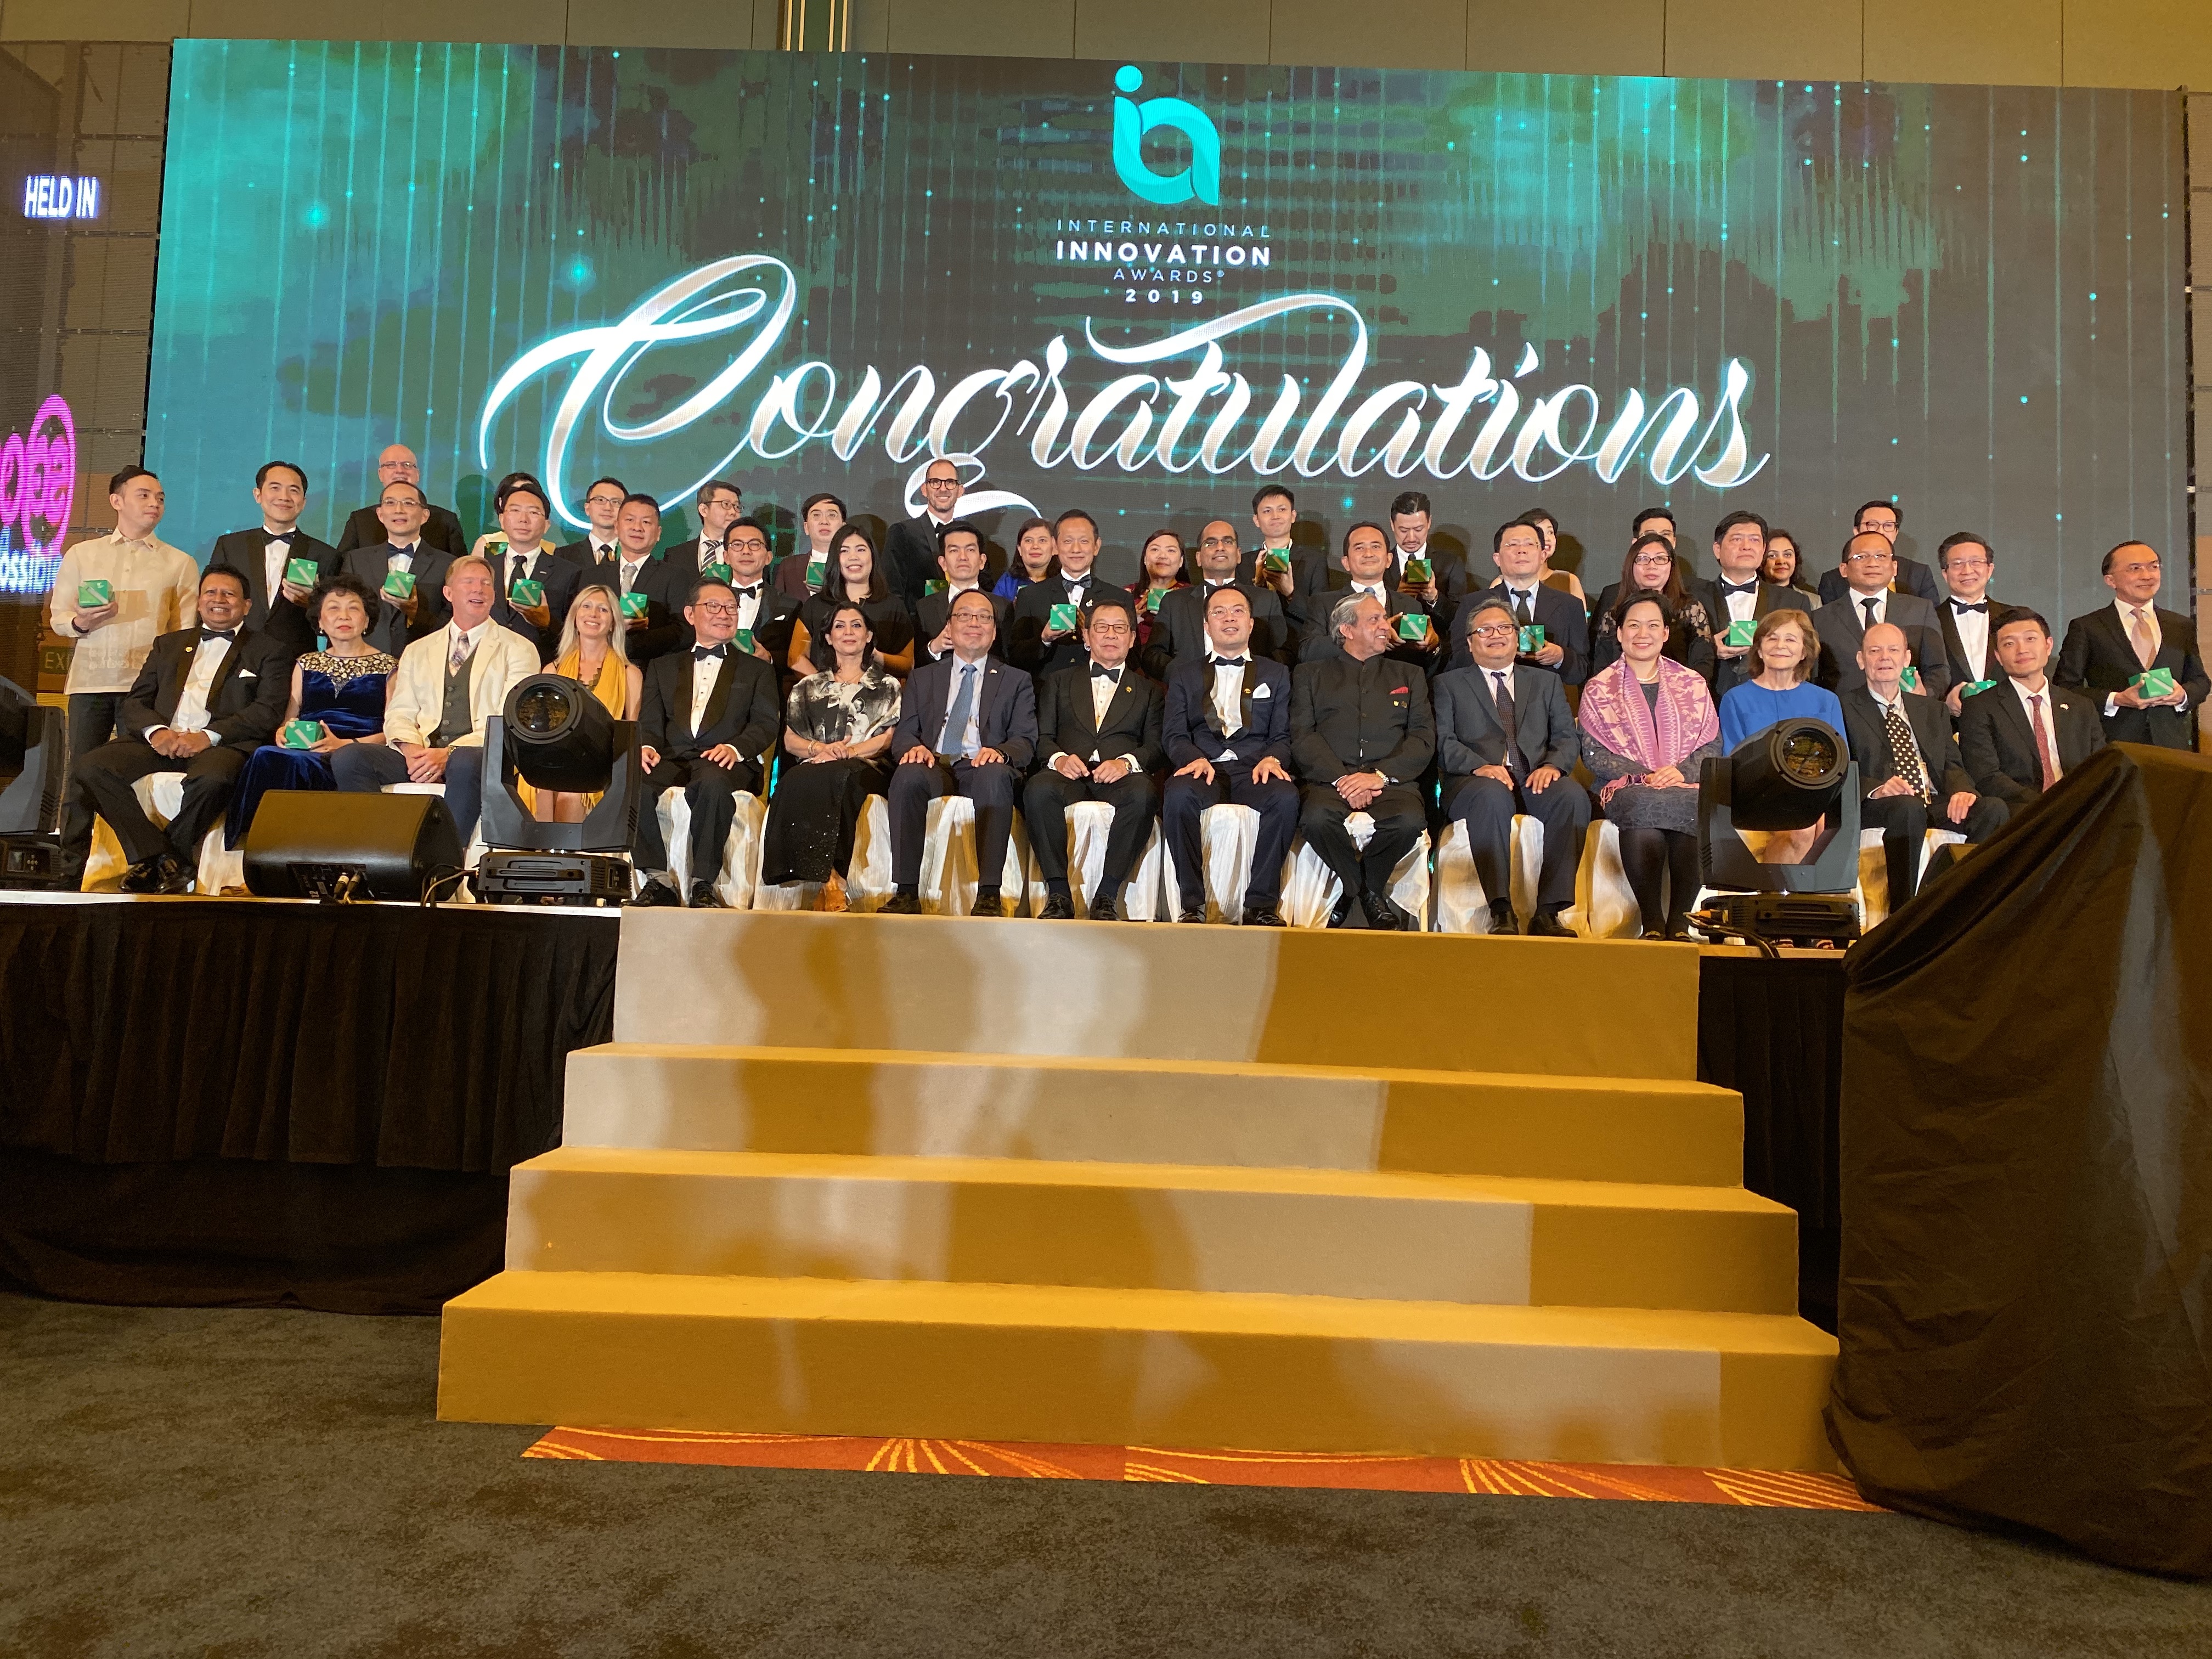 Winners of the International Innovation Awards 2019 take a group photo at a ceremony in Singapore on December 4, 2019. Photo: Minh Huynh / Tuoi Tre